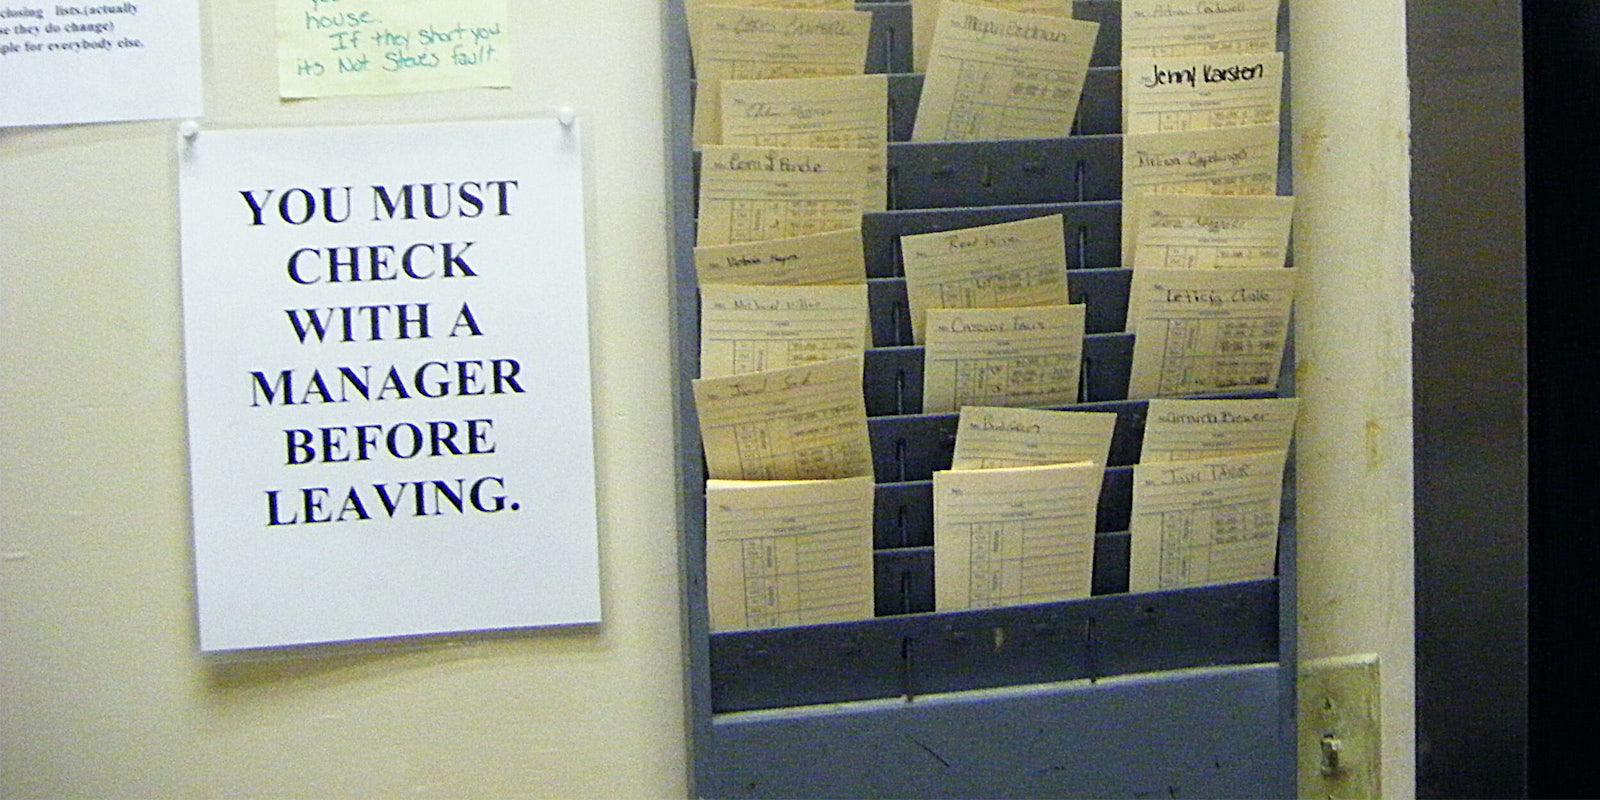 Timecards next to a sign that says 'You must check with a manager before leaving'